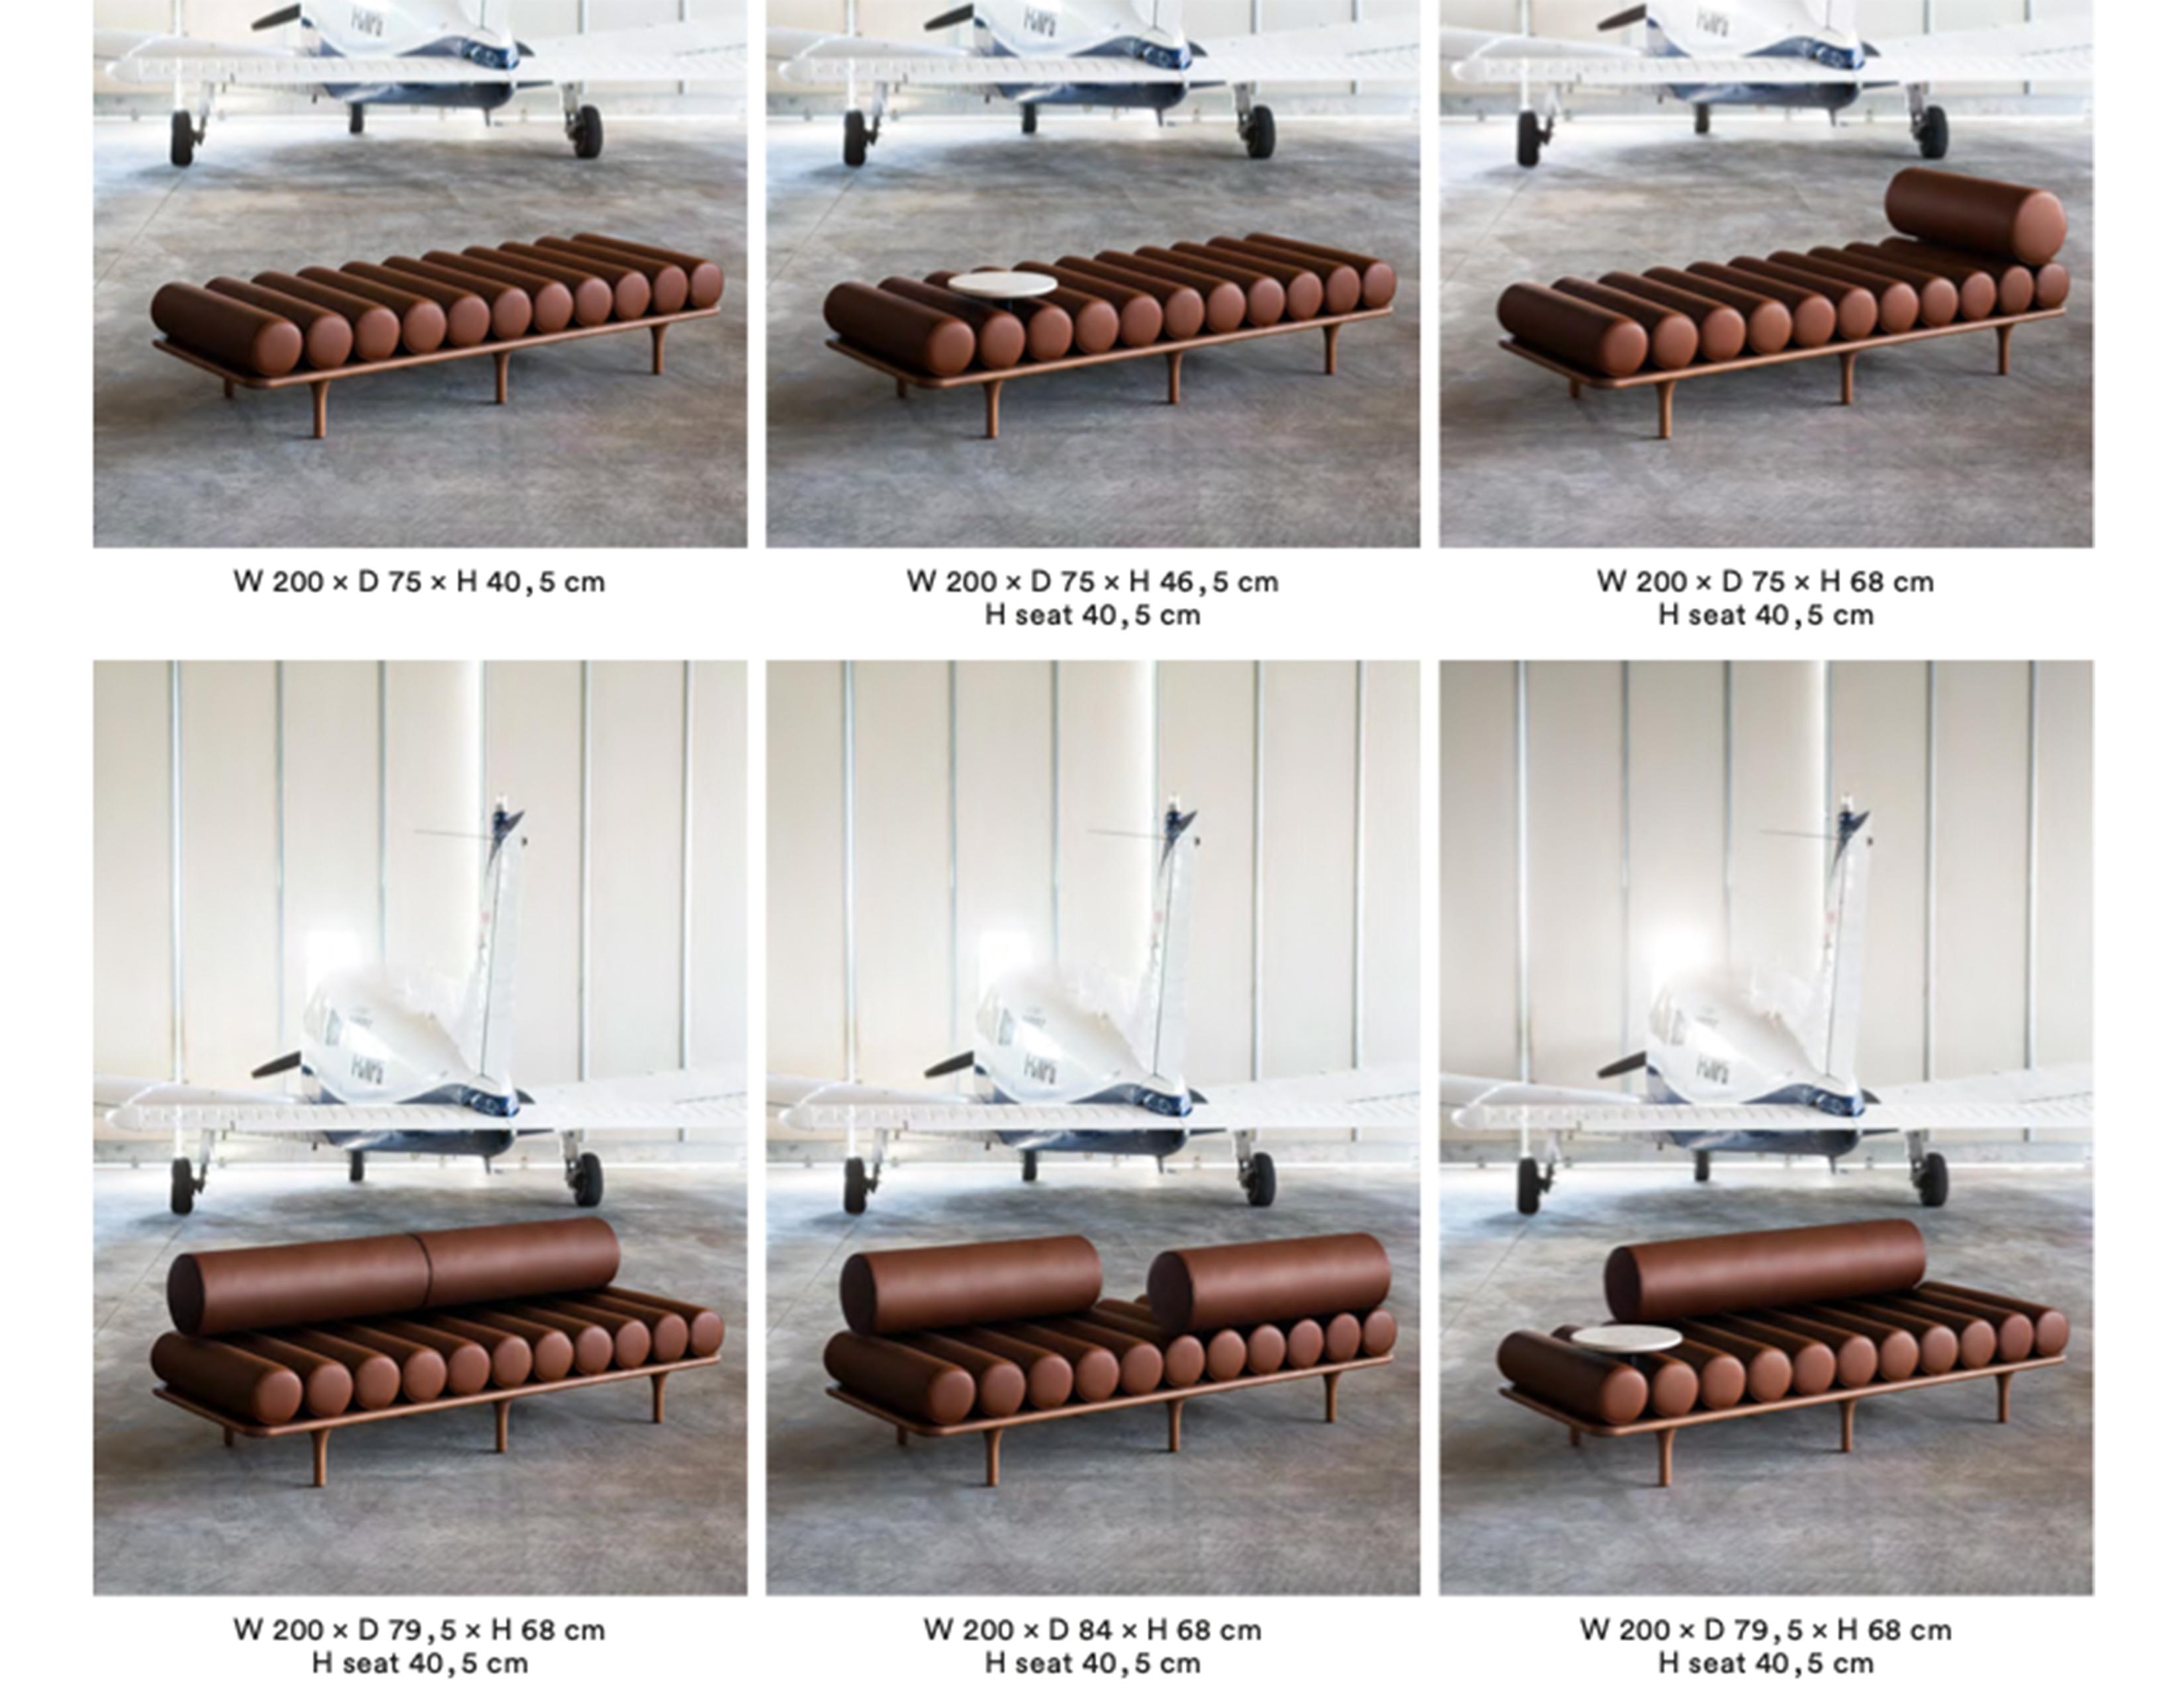 PRICE FOR FABRIC

Tacchini is pleased to present you a sneak-peek of the new collection, in collaboration with Studiopepe: Five to Nine, a modern daybed that could turn into waiting seat, maintaining the allure of a modernist interior. This